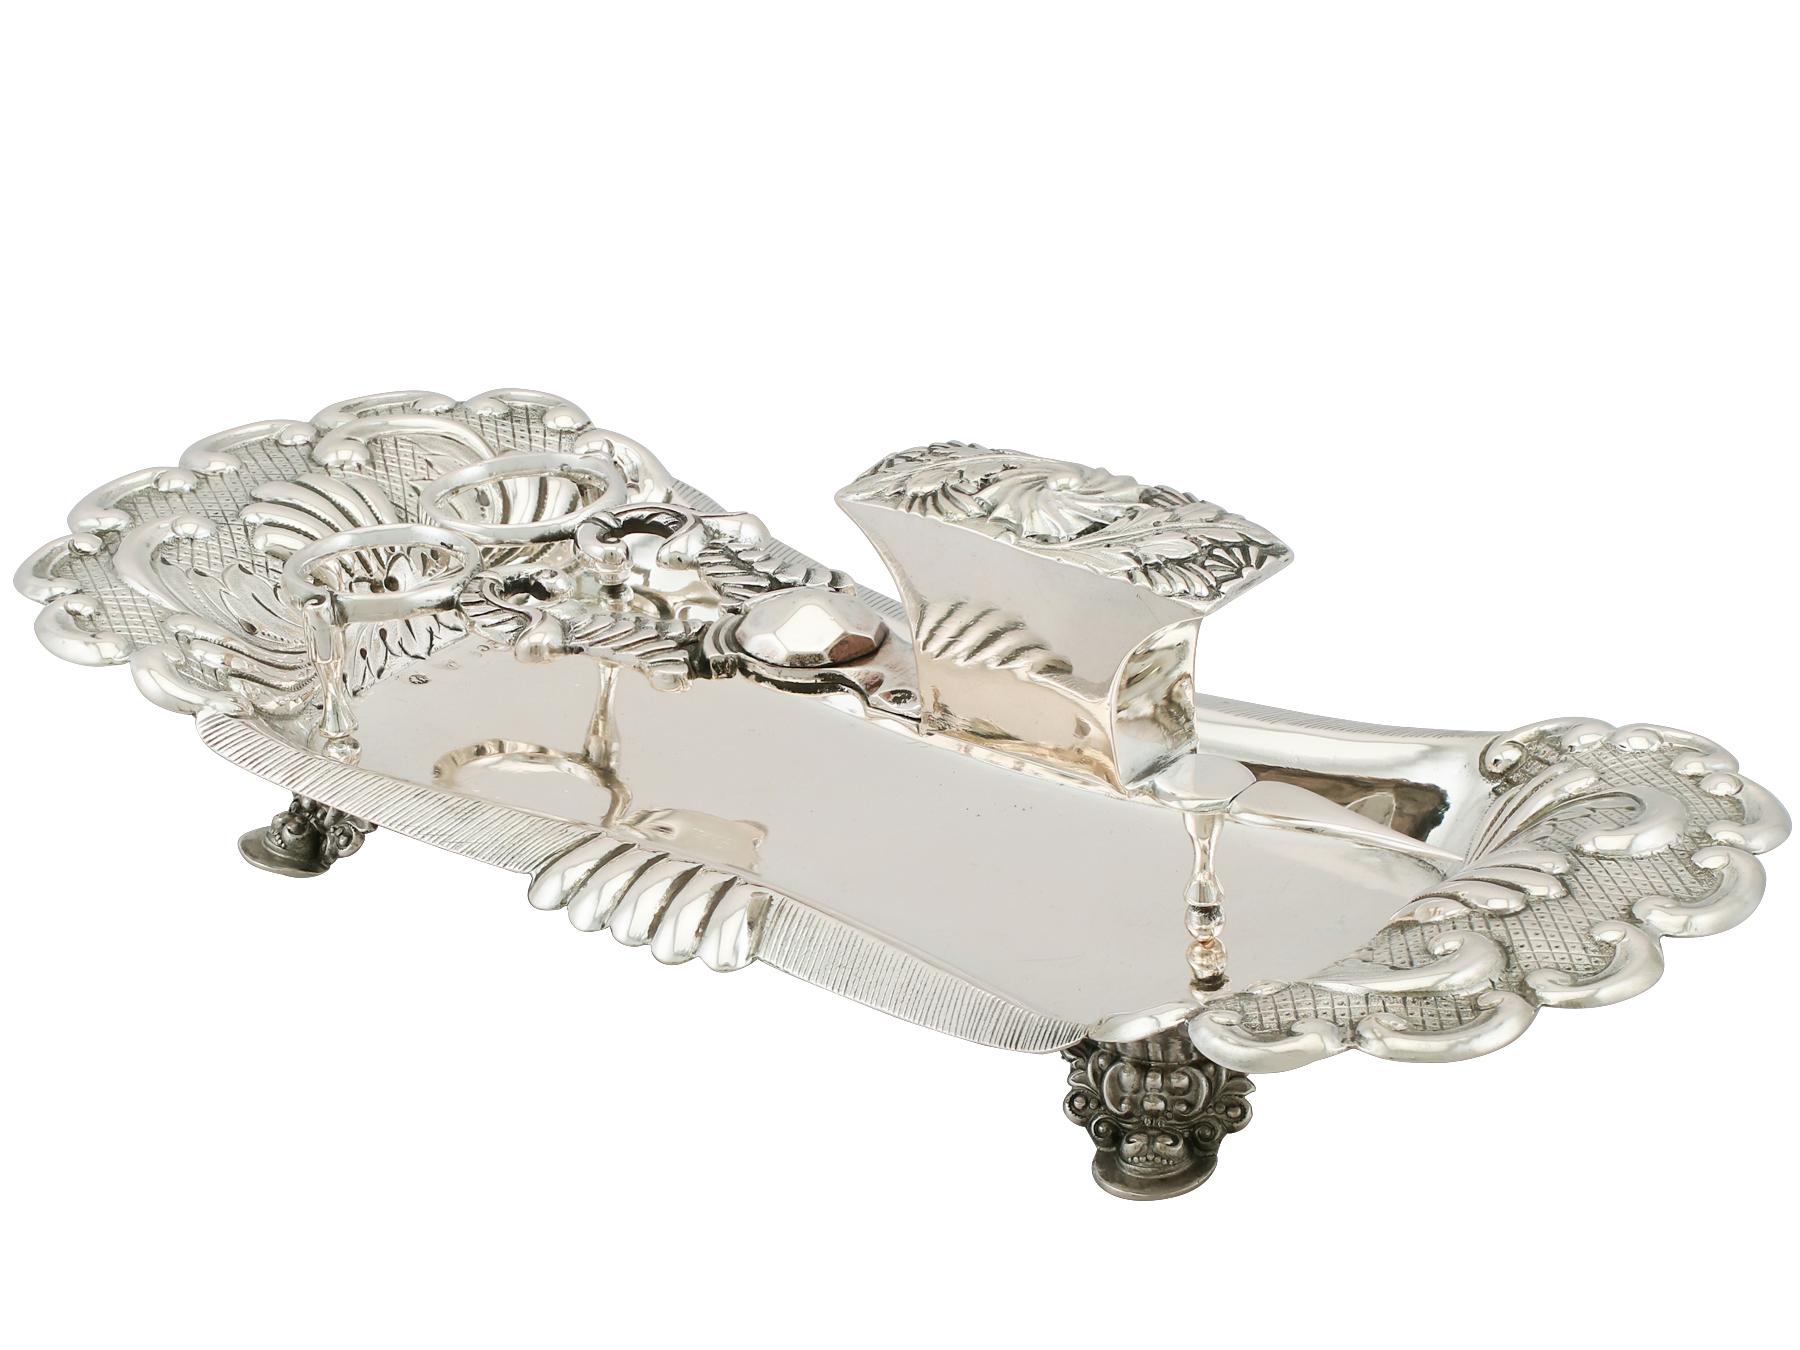 An exceptional, fine and impressive pair of antique German silver wick trimmers and snuffer tray; an addition to our silver flatware collection.

This exceptional pair of antique German silver wick trimmers/snuffer has a hinged scissor